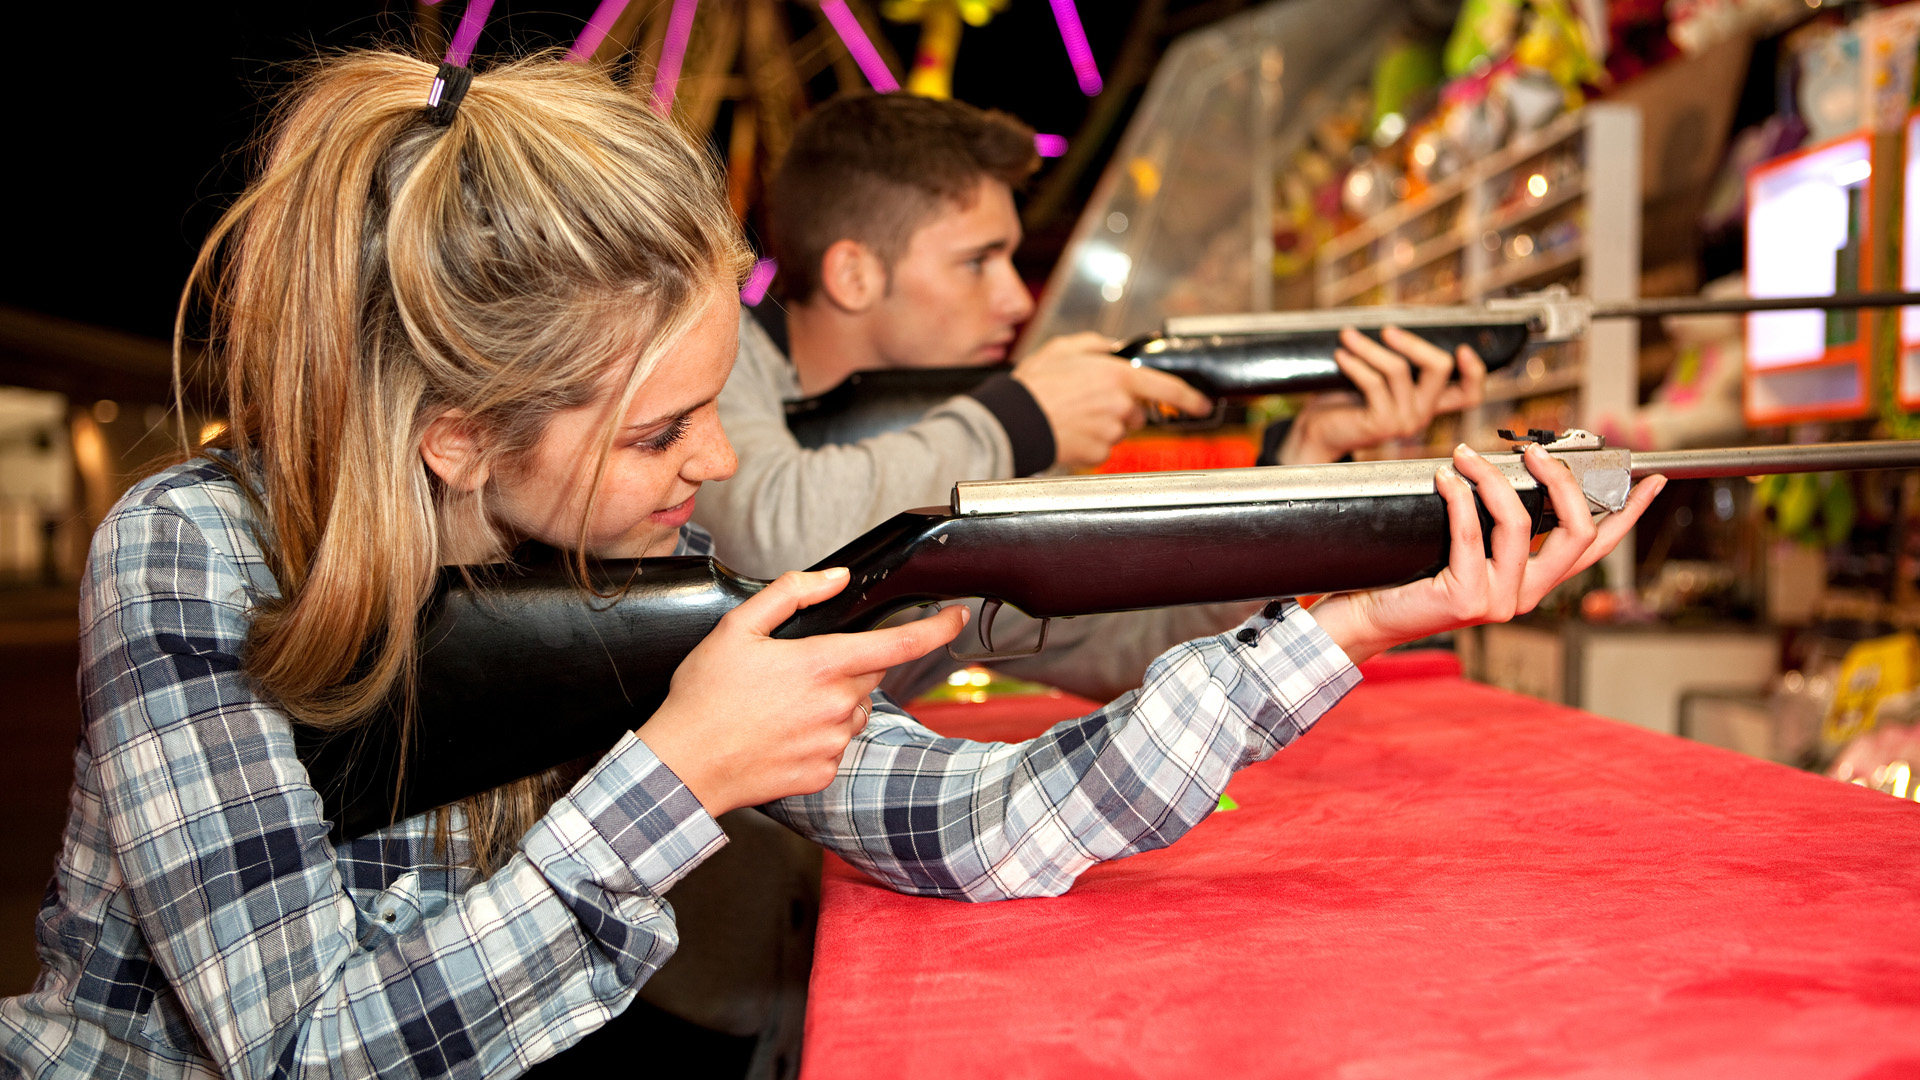 Blonde woman in a checkered shirt and man in a jacket, both holding rifles and taking aim at an amusement park.